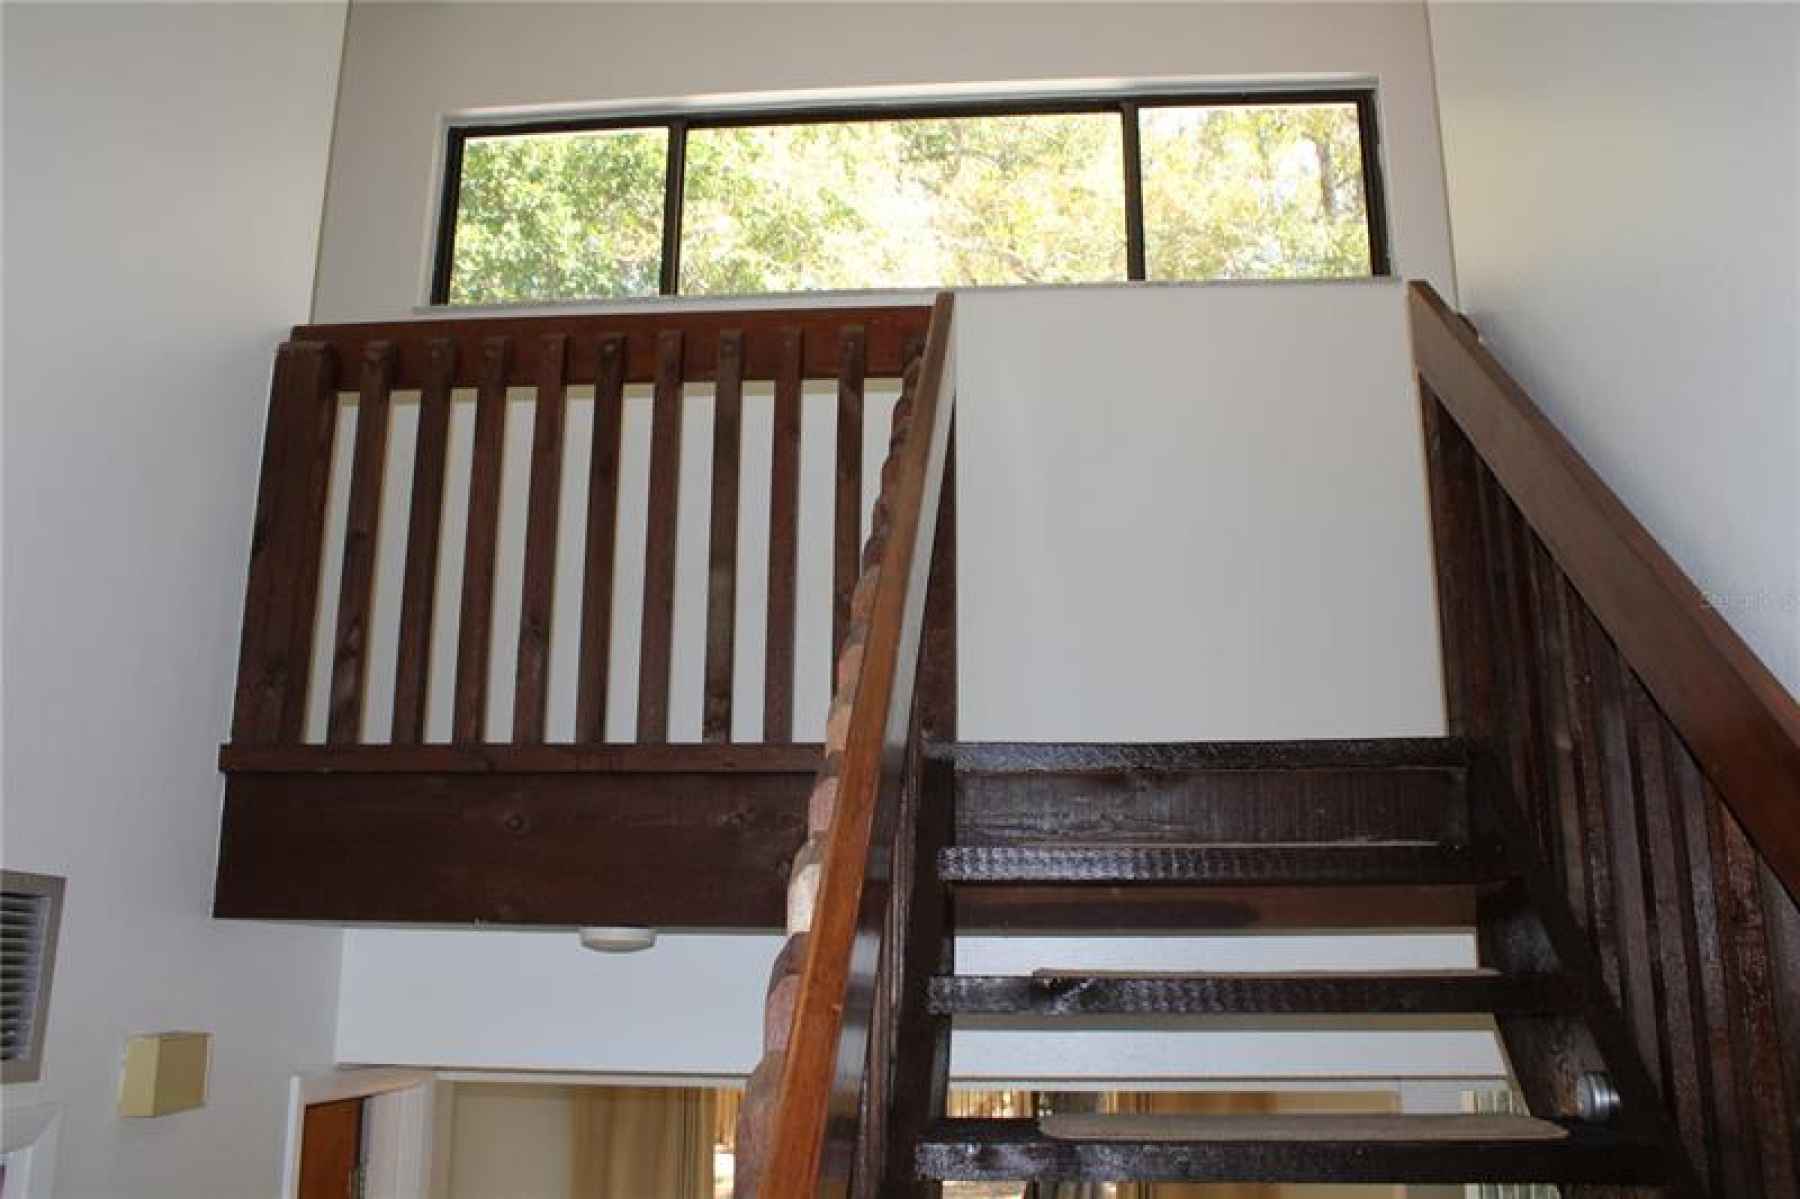 Stair case to second floor